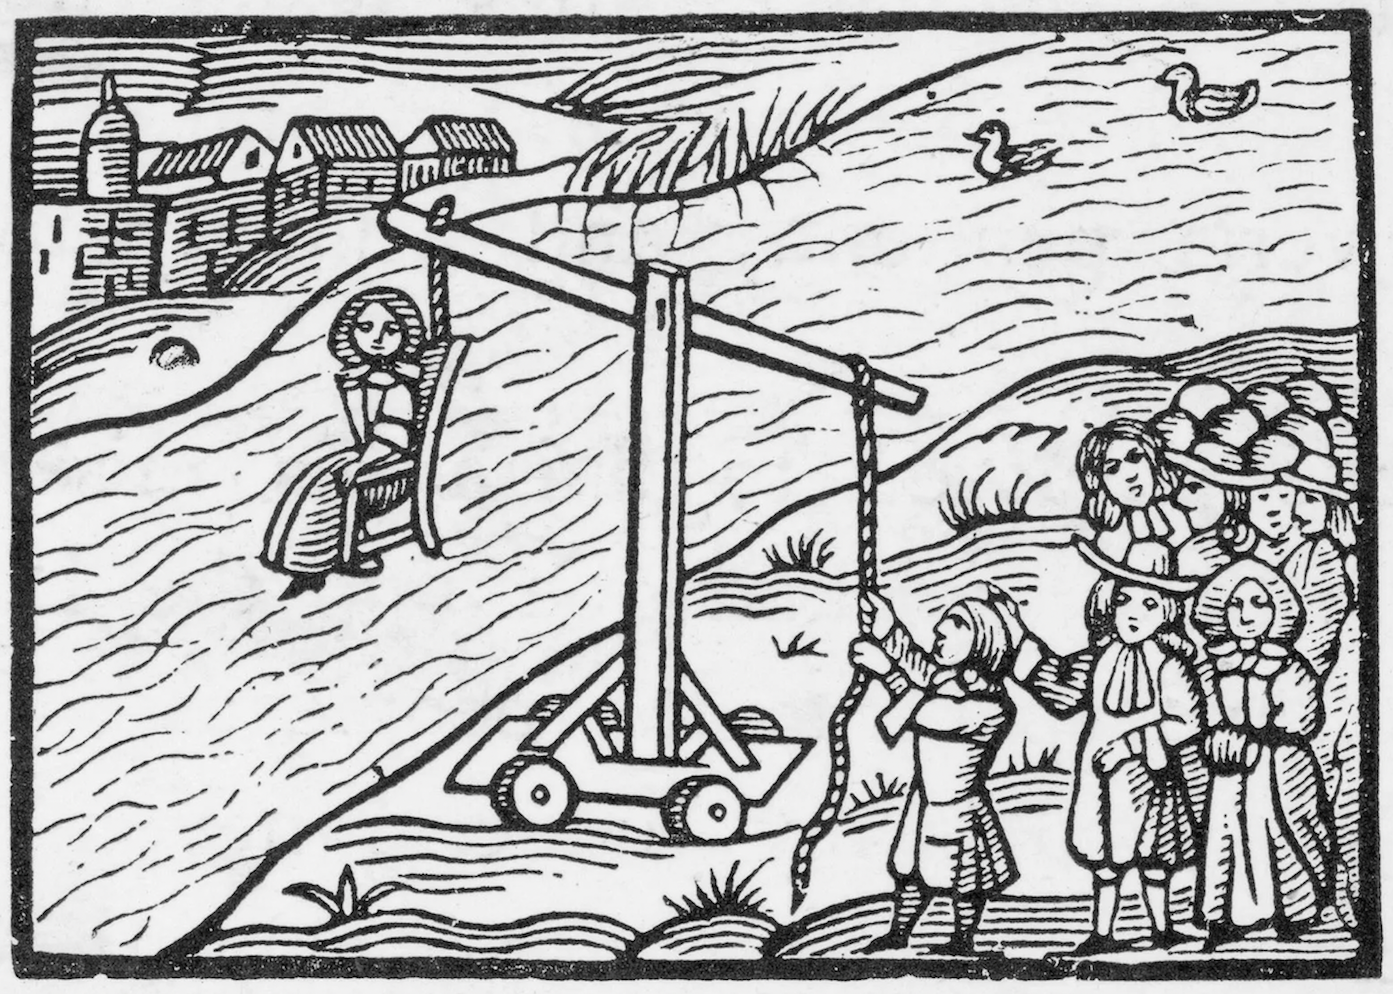 Public humiliation punishments were especially common for women, and cucking and ducking stools were often used in 17th century England against women suspected of infidelity or witchcraft. Victims were strapped into the seat, lifted, and paraded around town for all to see. Others were dunked into ponds for extended periods, leading to many drownings. Those who drowned were deemed innocent of any witchcraft.